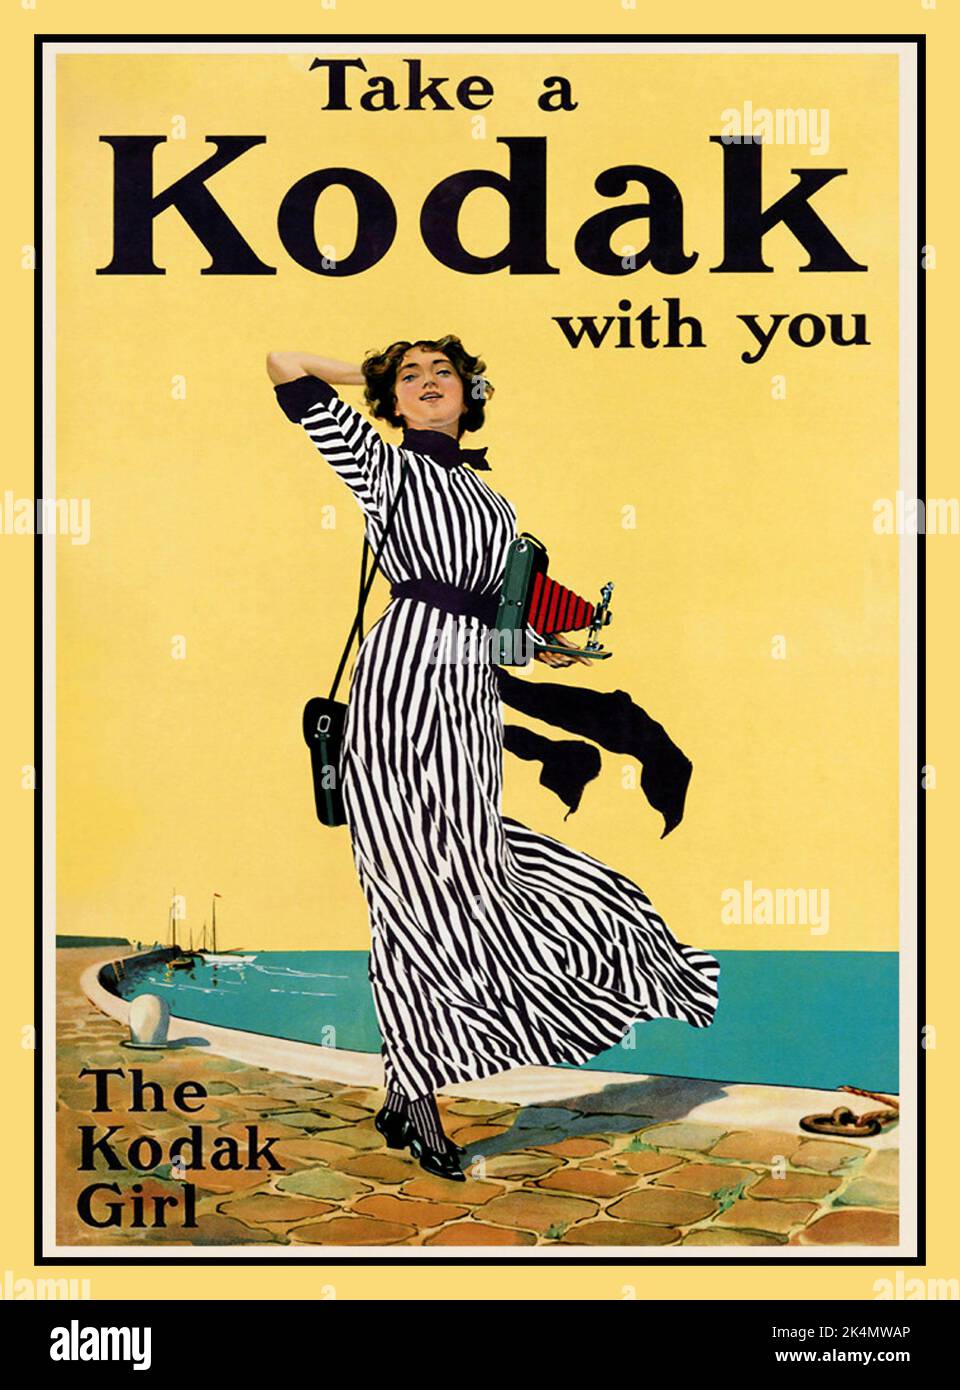 KODAK GIRL Vintage c1913 Poster advertisement 'TAKE A KODAK WITH YOU',  illustrating an independent women holding a Kodak folding bellows roll film camera, at the beginning of a new technology era, embracing a forward looking marketing strategy by Eastman Kodak that included the new iconic “Kodak Girl” Stock Photo